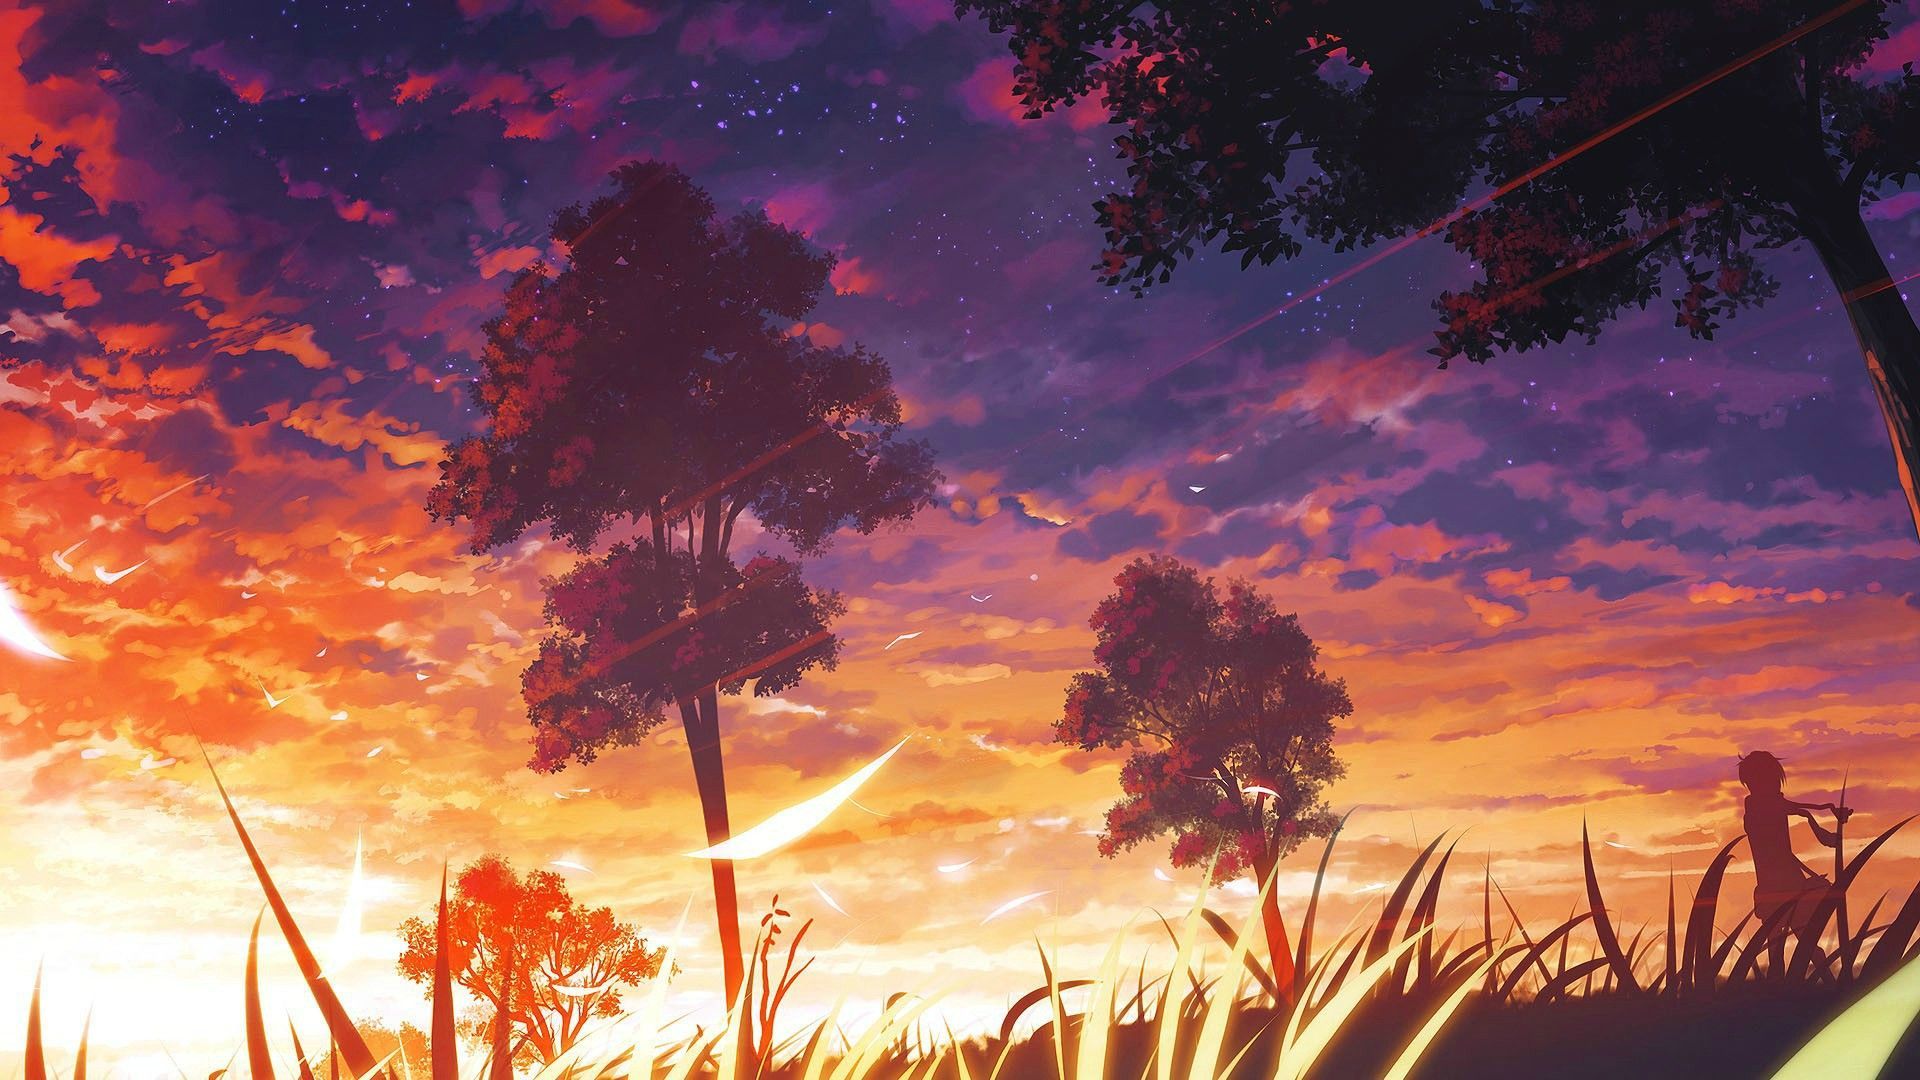 Wallpaper collection. Anime scenery wallpaper, Anime scenery, Scenery wallpaper